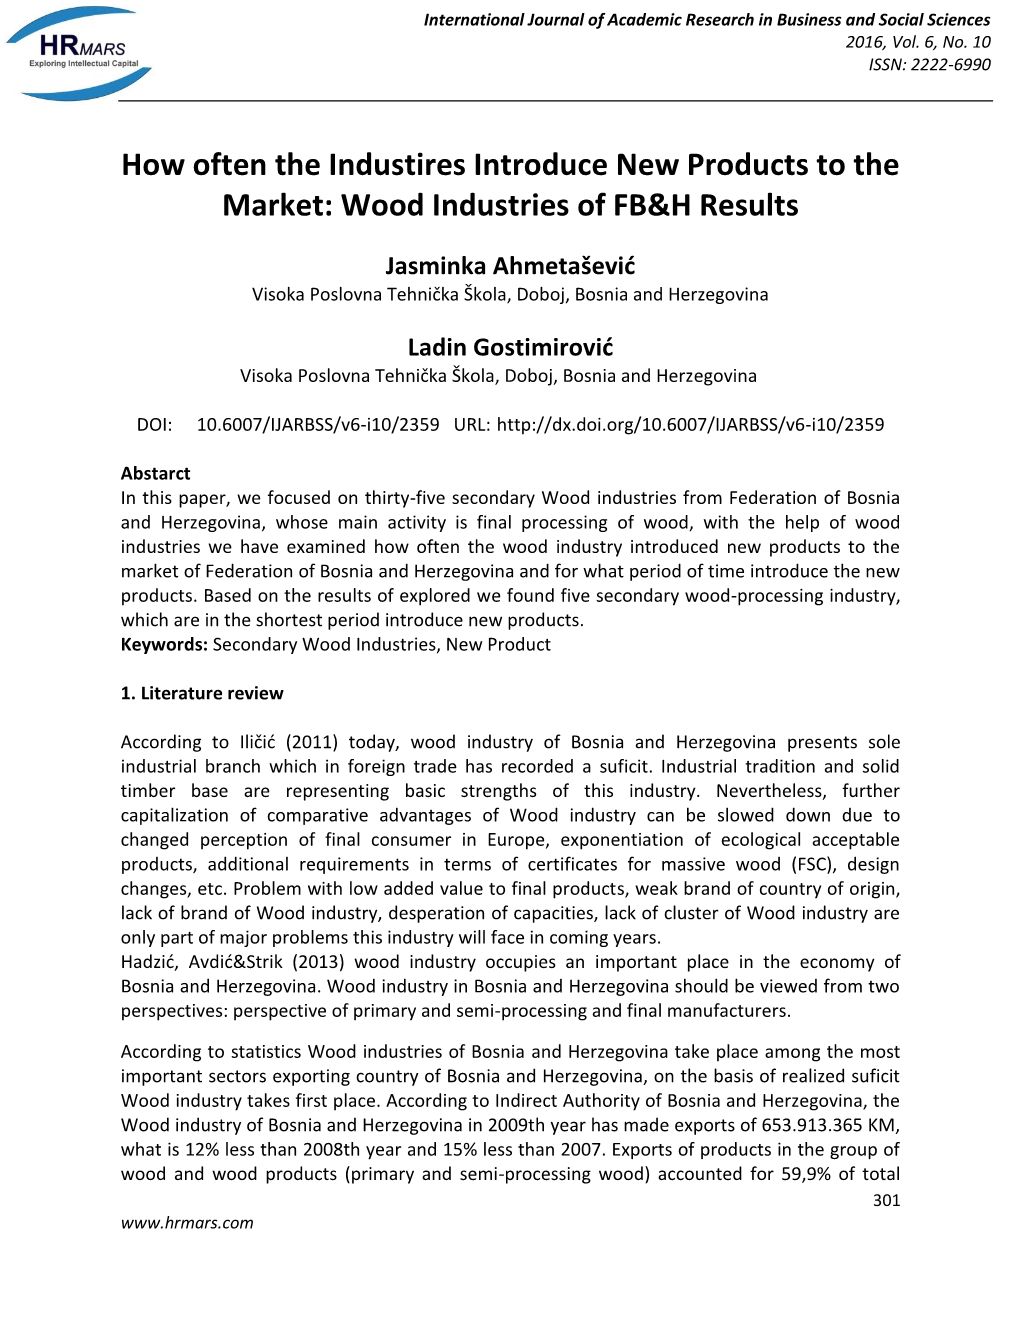 How Often the Industires Introduce New Products to the Market: Wood Industries of FB&H Results